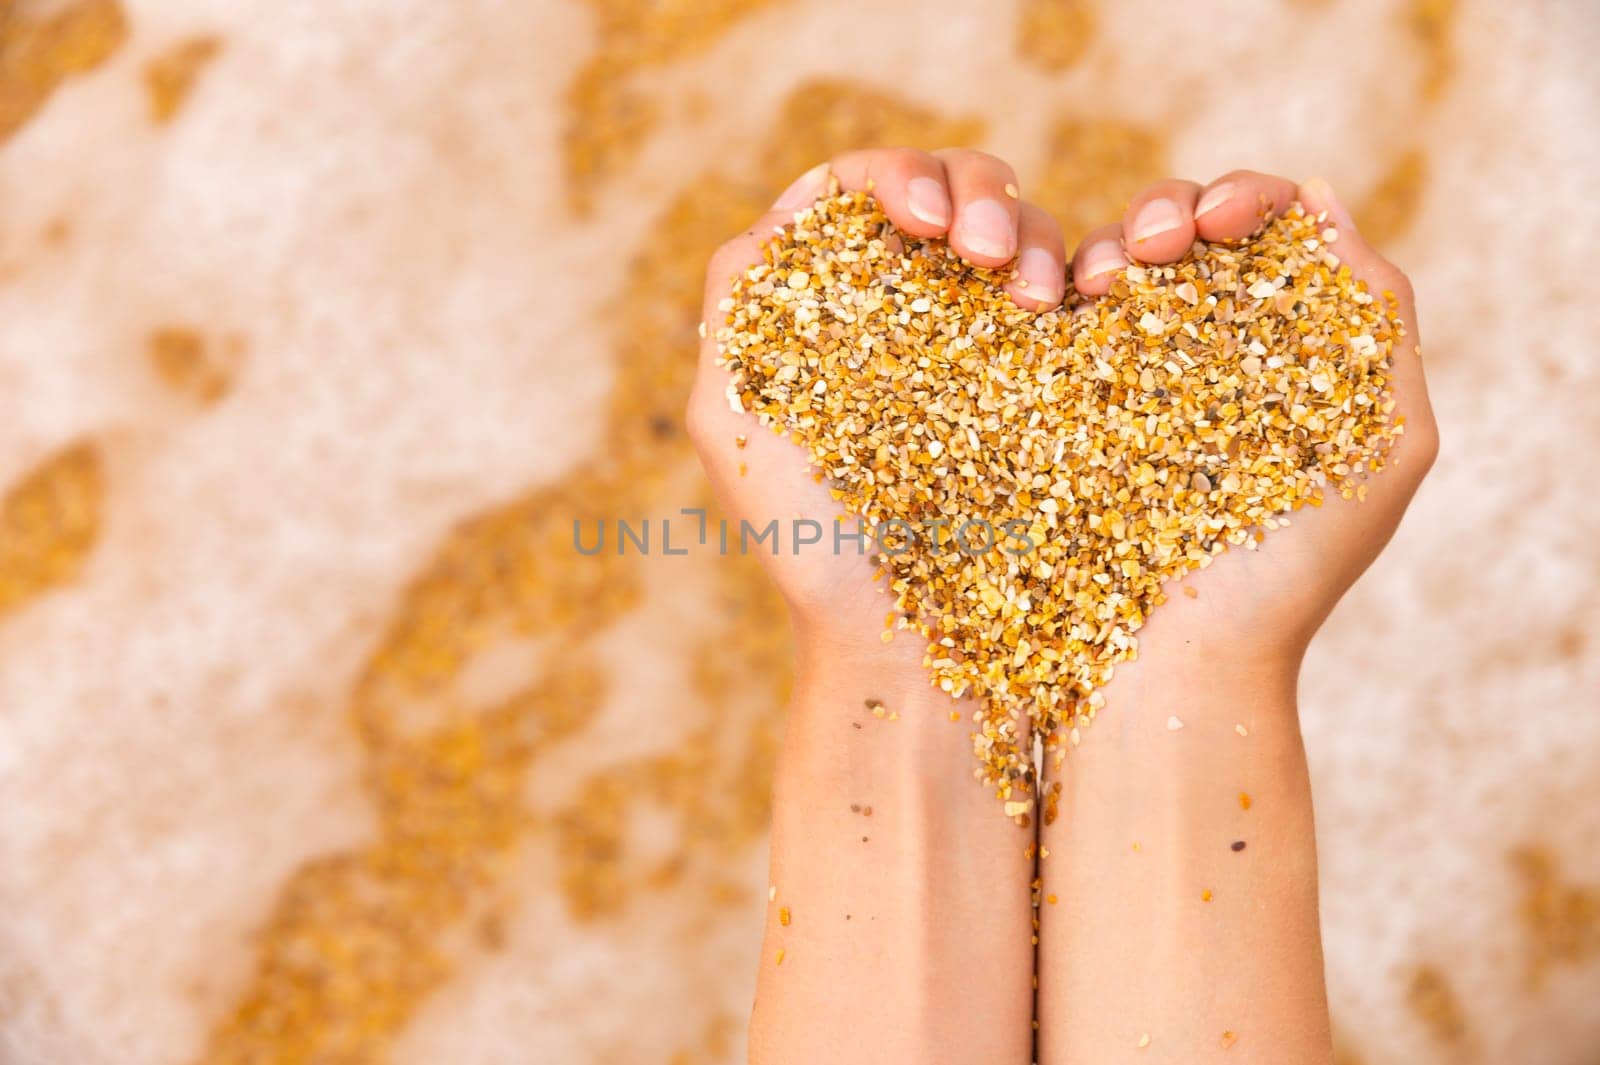 Soft heart shapes of women's hands over the beach. Women's hands hold sand in the shape of a heart against the background of sea waves.